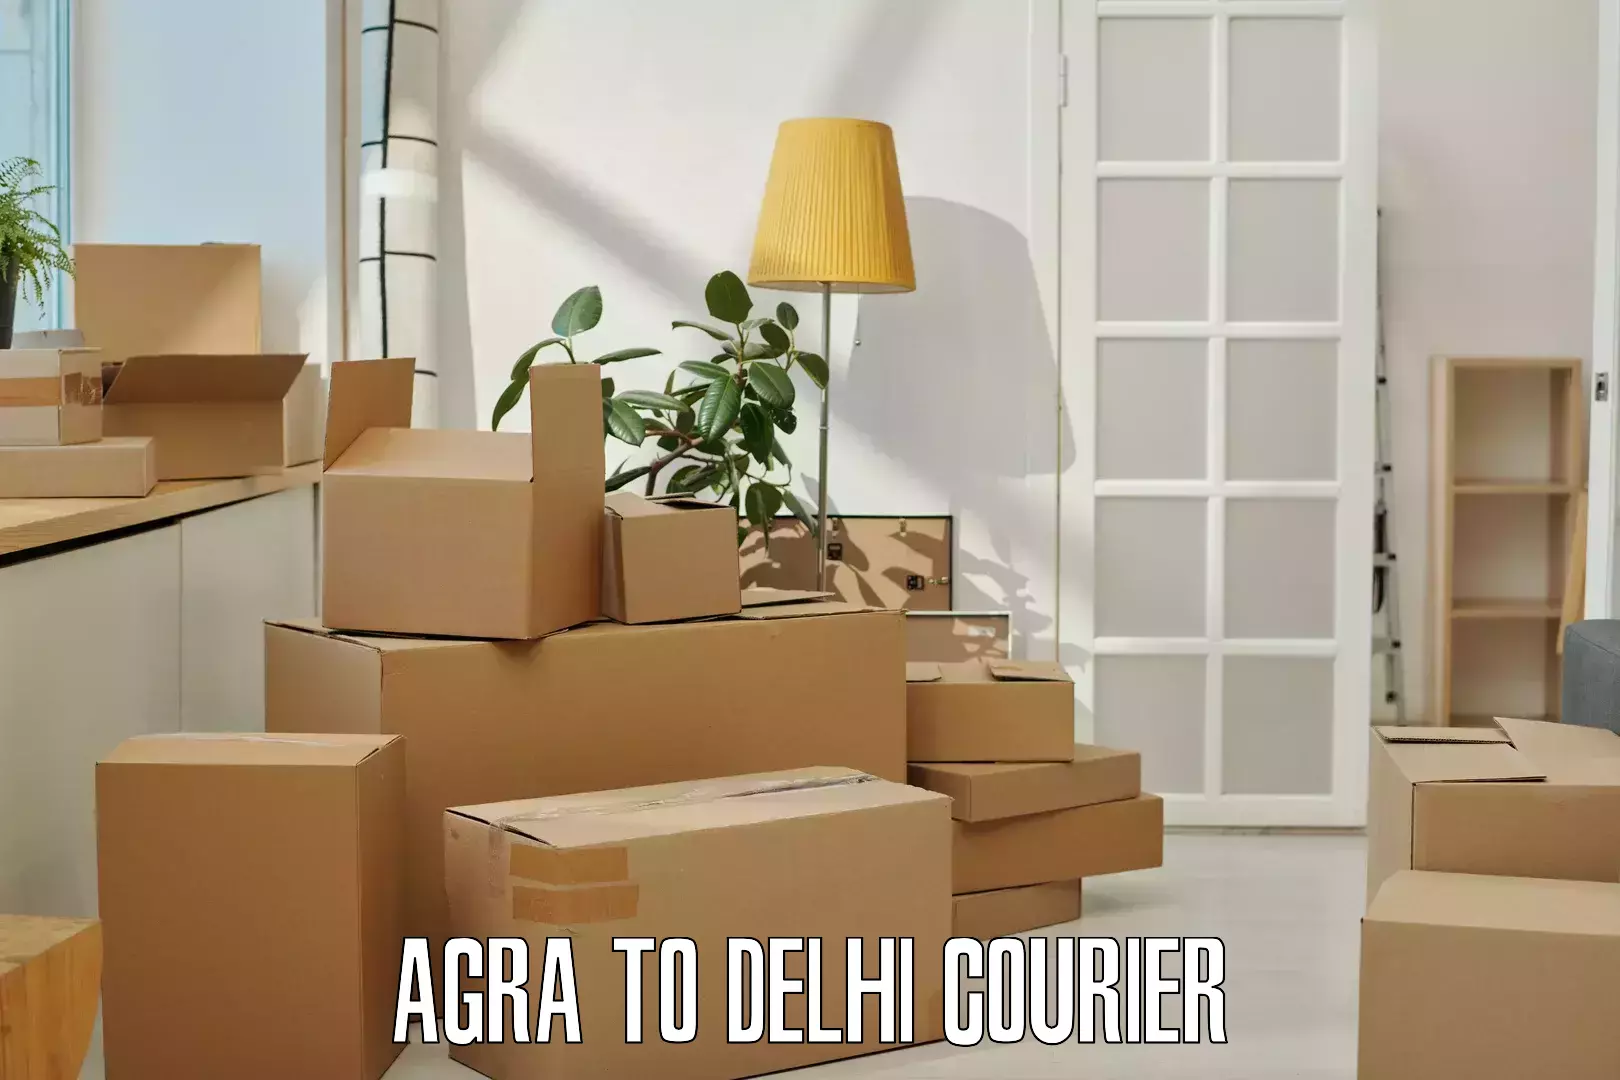 Express logistics providers Agra to Lodhi Road